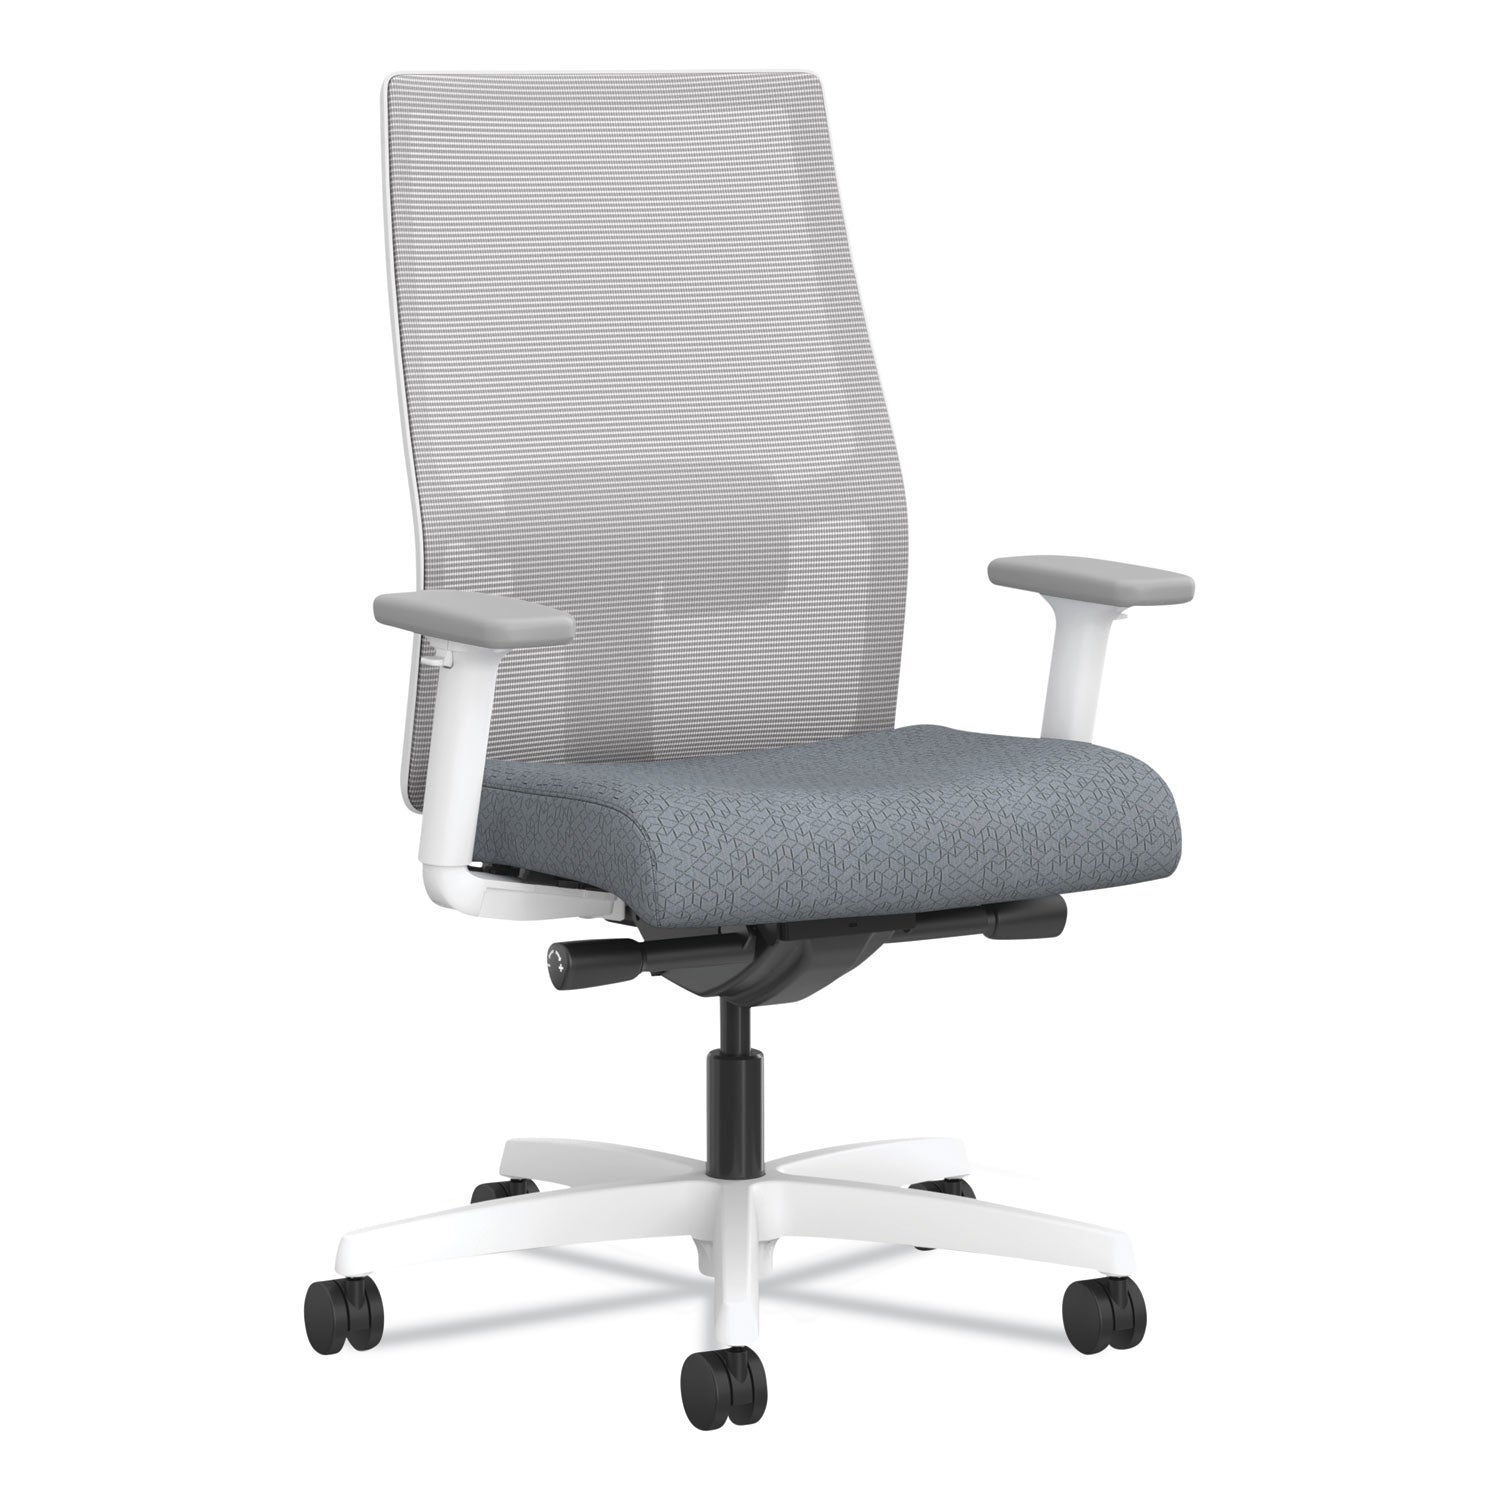 ignition-20-4-way-stretch-mid-back-mesh-task-chair-up-to-300-lb-17--20-seat-ht-basalt-fog-whiteships-in-7-10-bus-days_honi2mm2afa25yx - 1